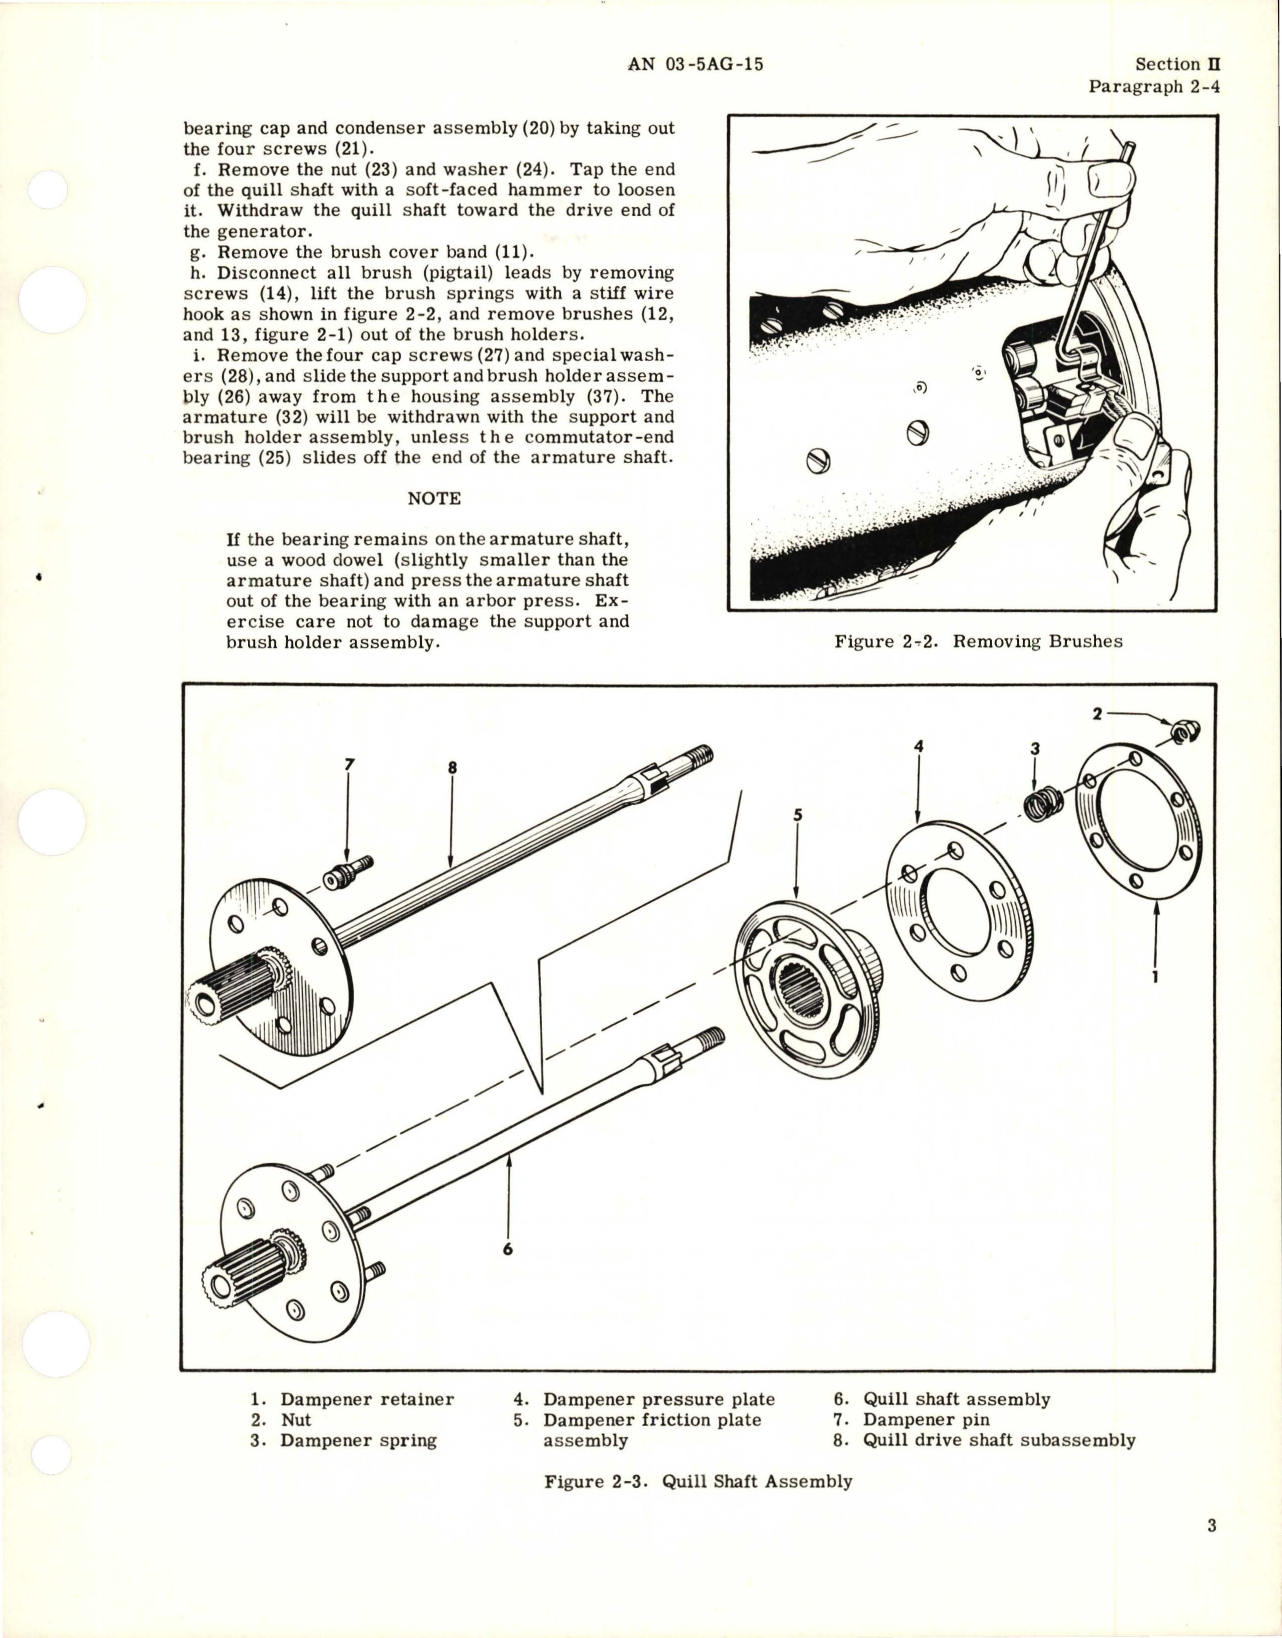 Sample page 7 from AirCorps Library document: Overhaul Instructions for Generator - Model G35-2